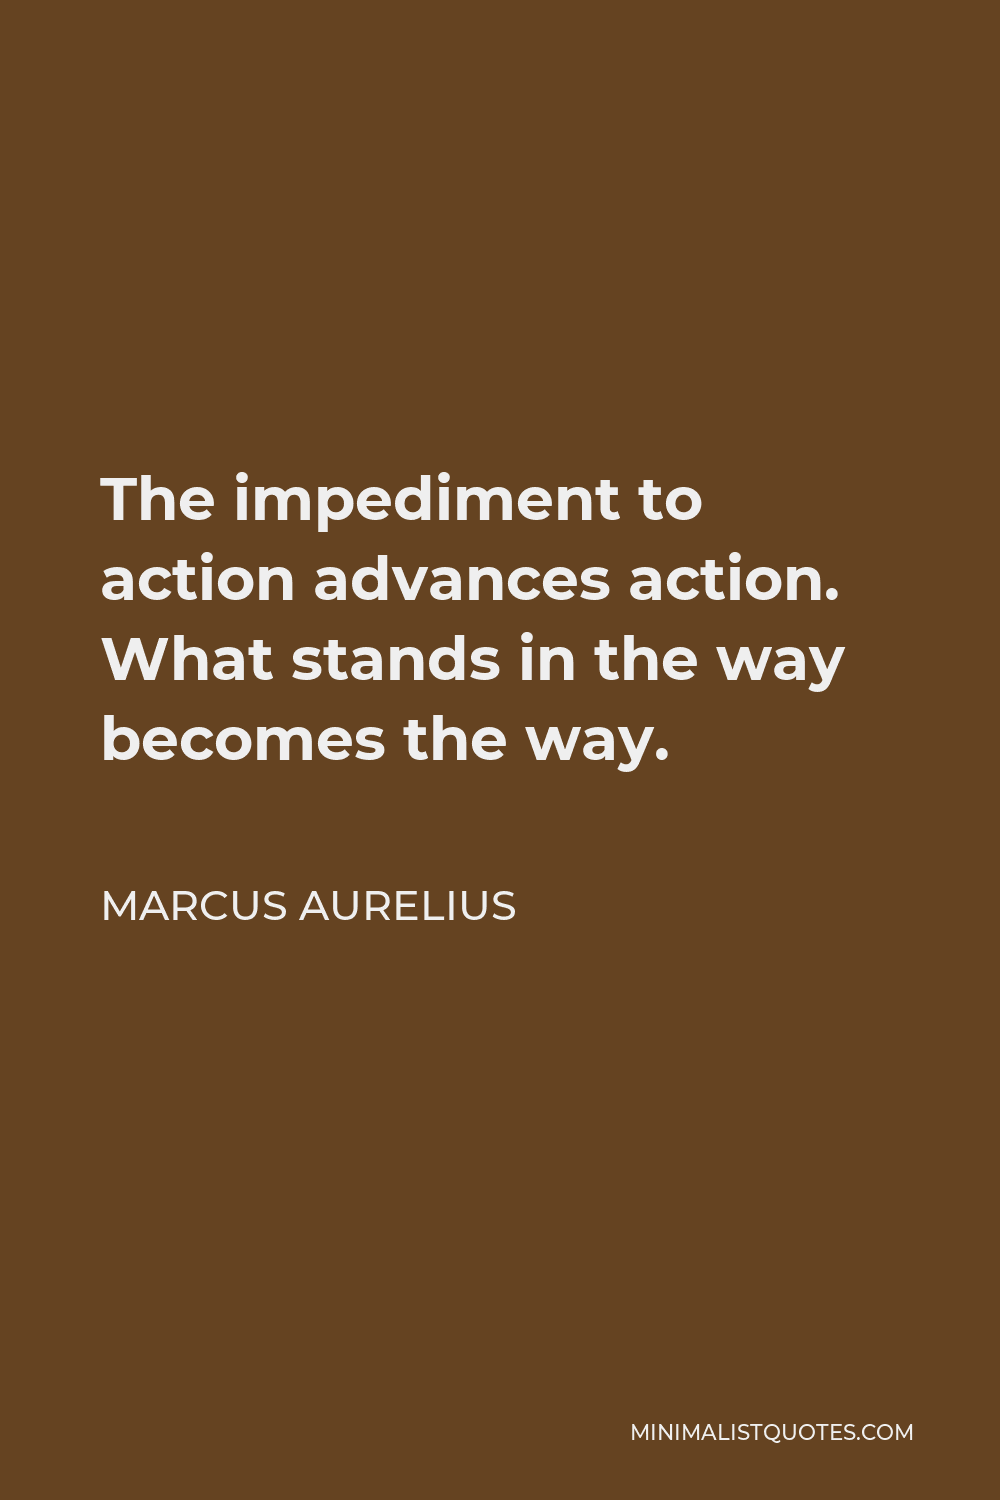 Marcus Aurelius Quote - The impediment to action advances action. What stands in the way becomes the way.